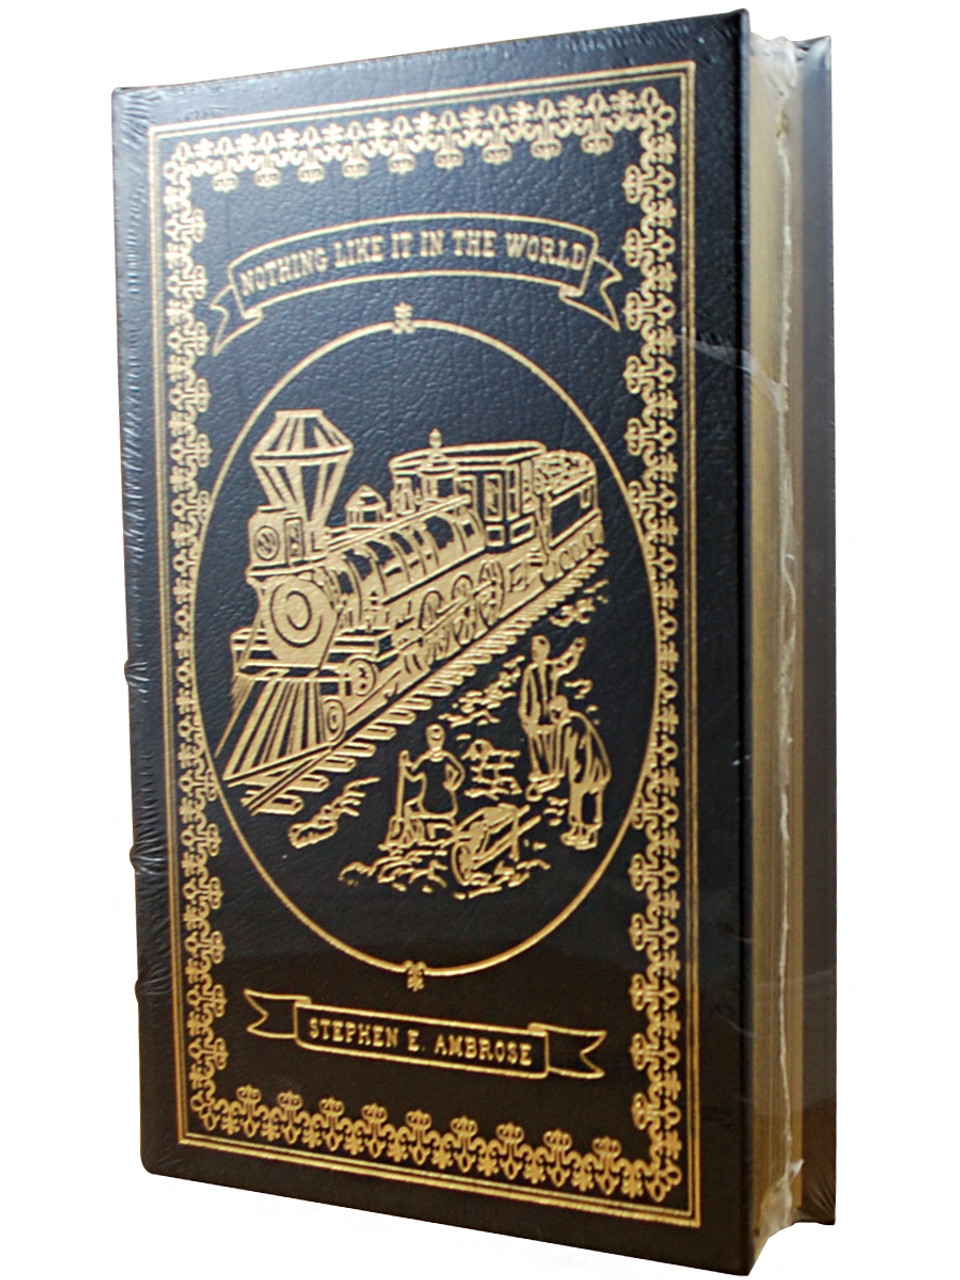 Stephen E. Ambrose "Nothing Like It In The World" Signed First Edition, Leather Bound Collector's Edition of 1,650 w/COA [Sealed]